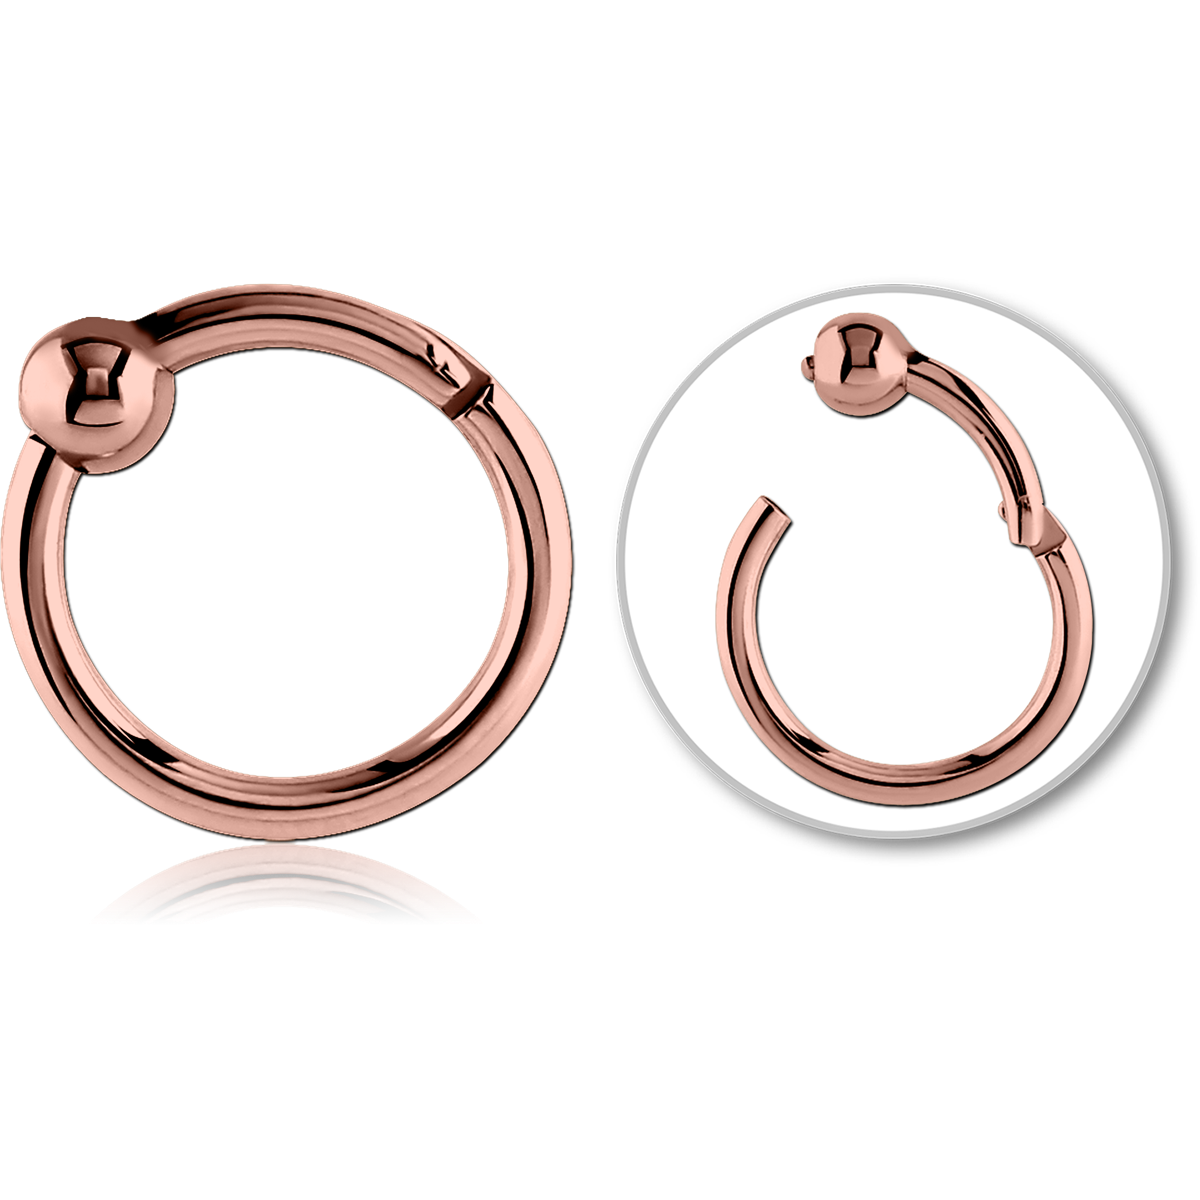 ROSE GOLD PVD COATED SURGICAL STEEL HINGED SEGMENT RING WITH BALL